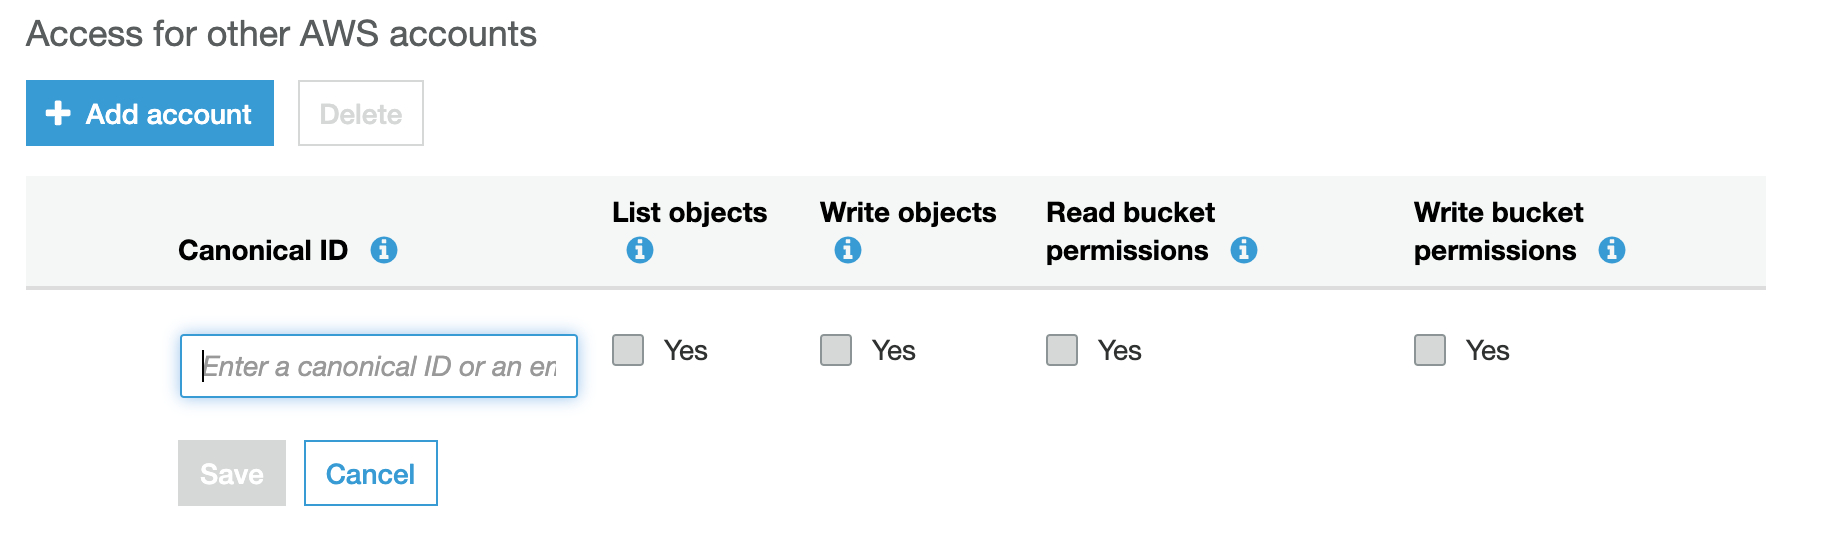 Access for other AWS accounts

*F Add account

Canonical ID ©

List objects Write objects

e

[Enter a canonical ID or an er.

Cancel

Yes

e

Yes

Read bucket
permissions ©

Yes

Write bucket
permissions ©

Yes